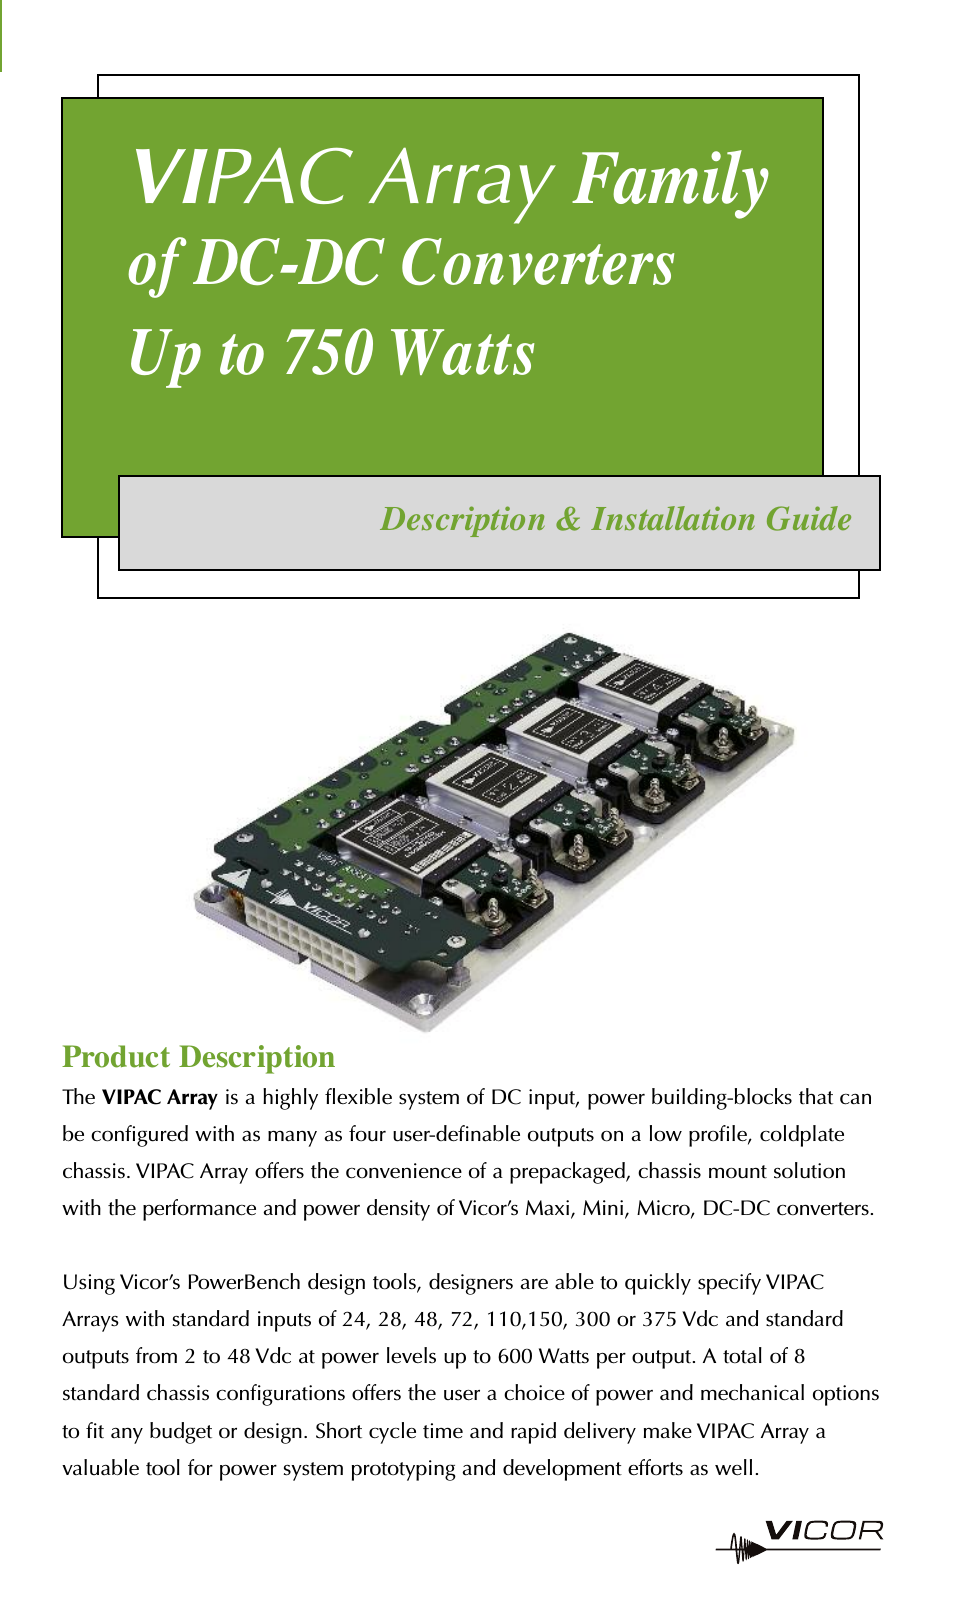 VIPAC Array Family of DC-DC Converters Up to 750 Watts